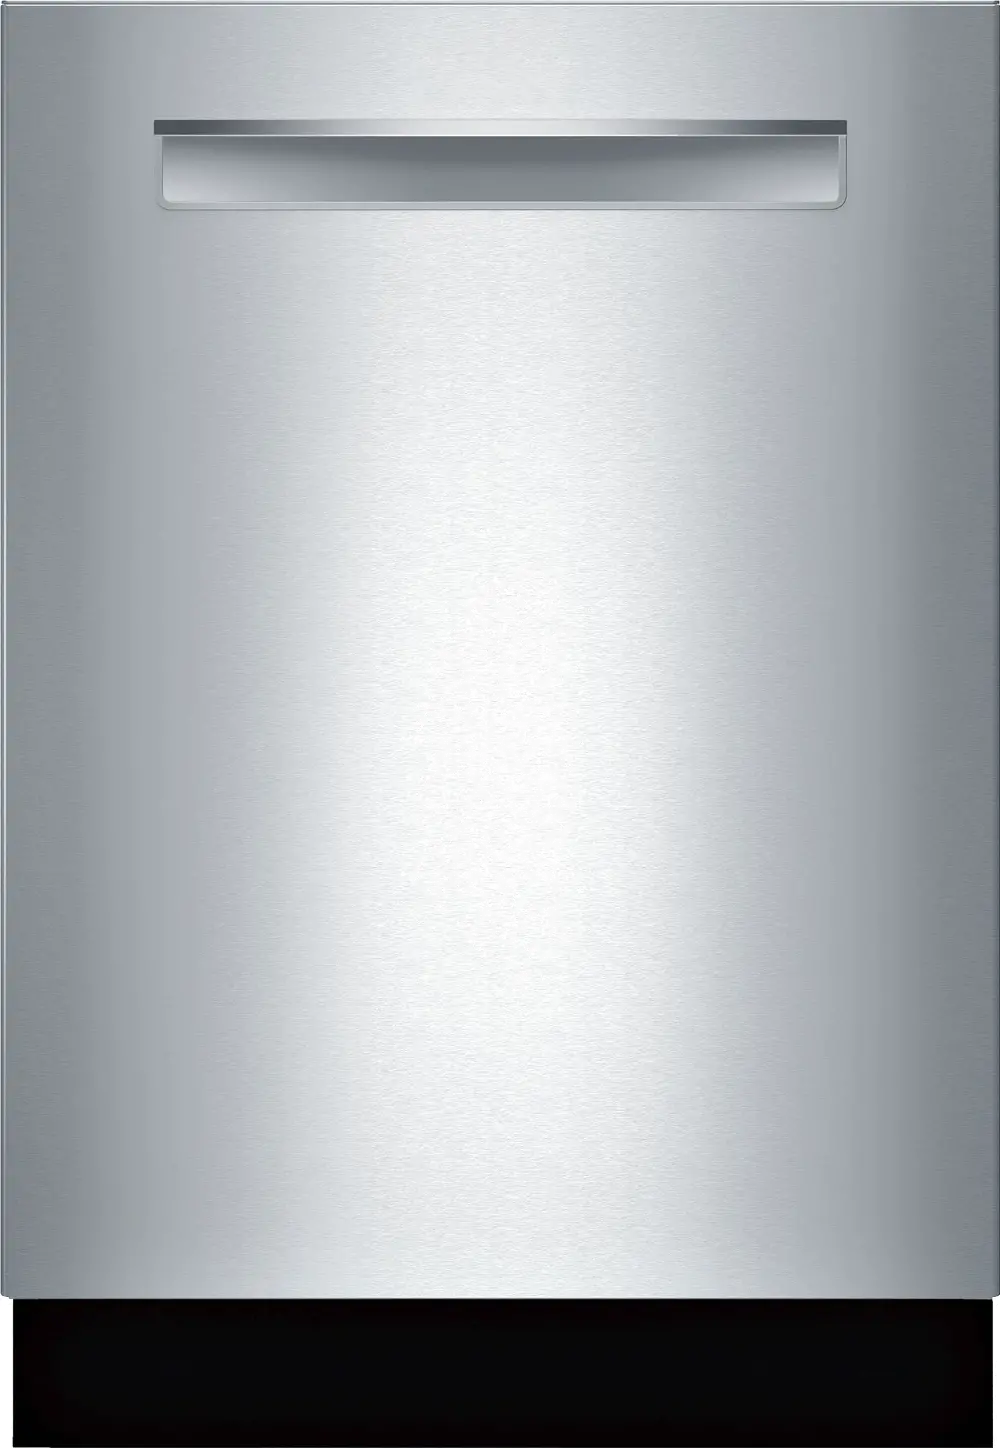 SHP88PZ55N Bosch Benchmark Top Control Dishwasher - Stainless Steel-1